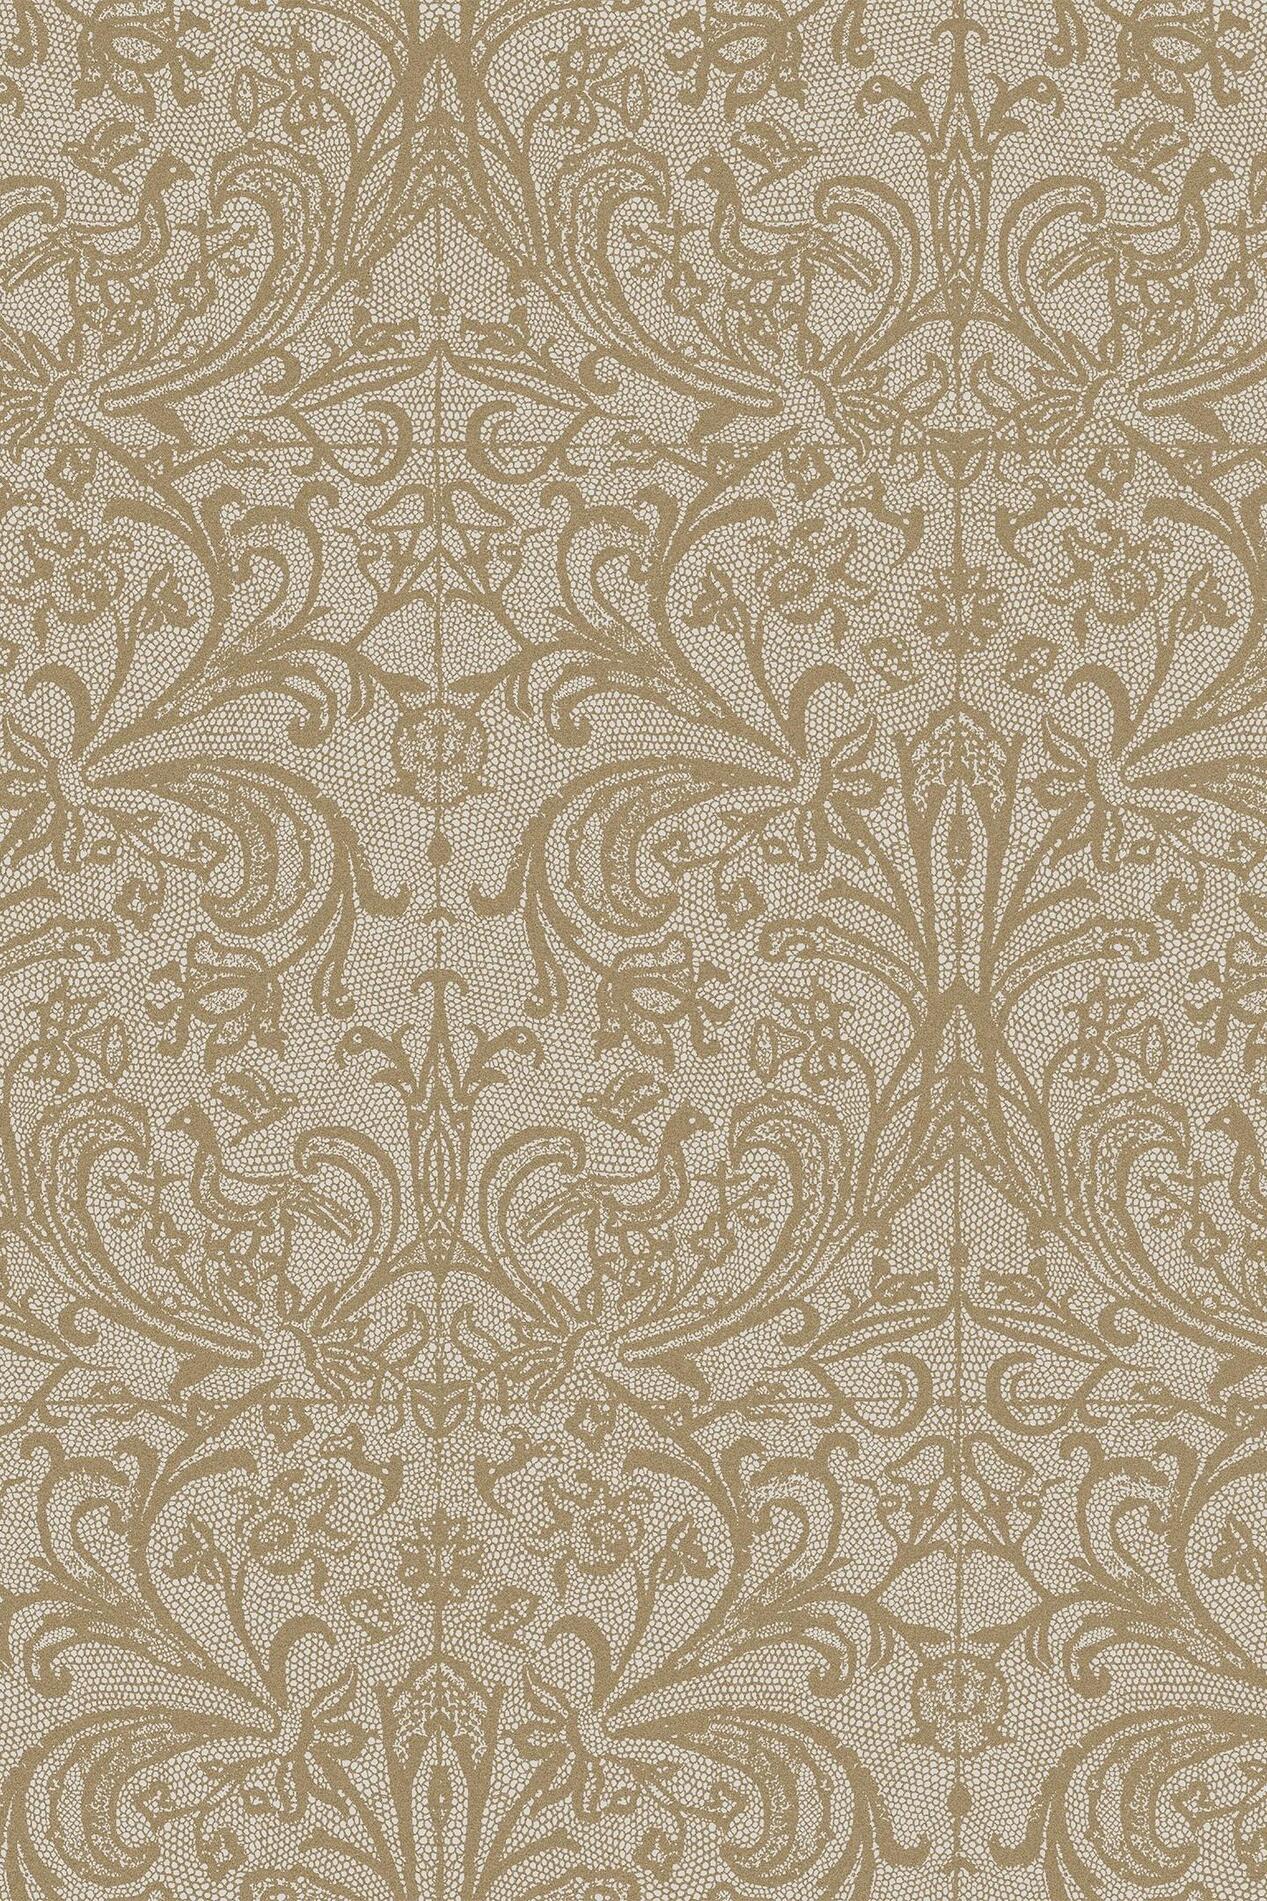 hooked-on-walls-classy-vibes-graceful-wallcovering-15512